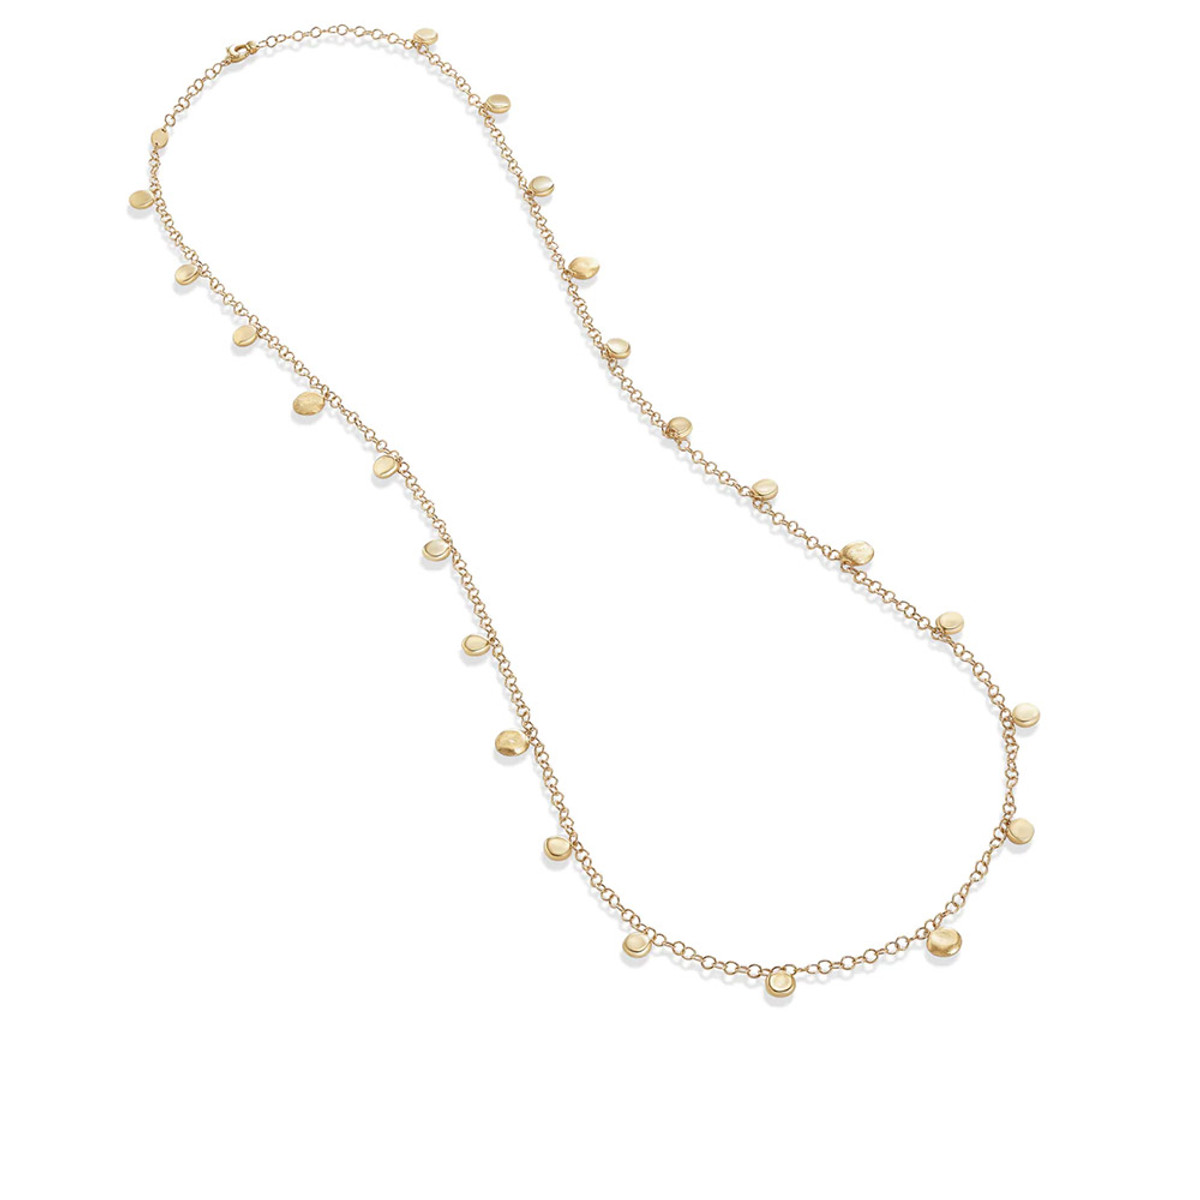 Marco Bicego 18K Yellow Gold Jaipur Engraved and Polished Charm Long Necklace-39550 Product Image